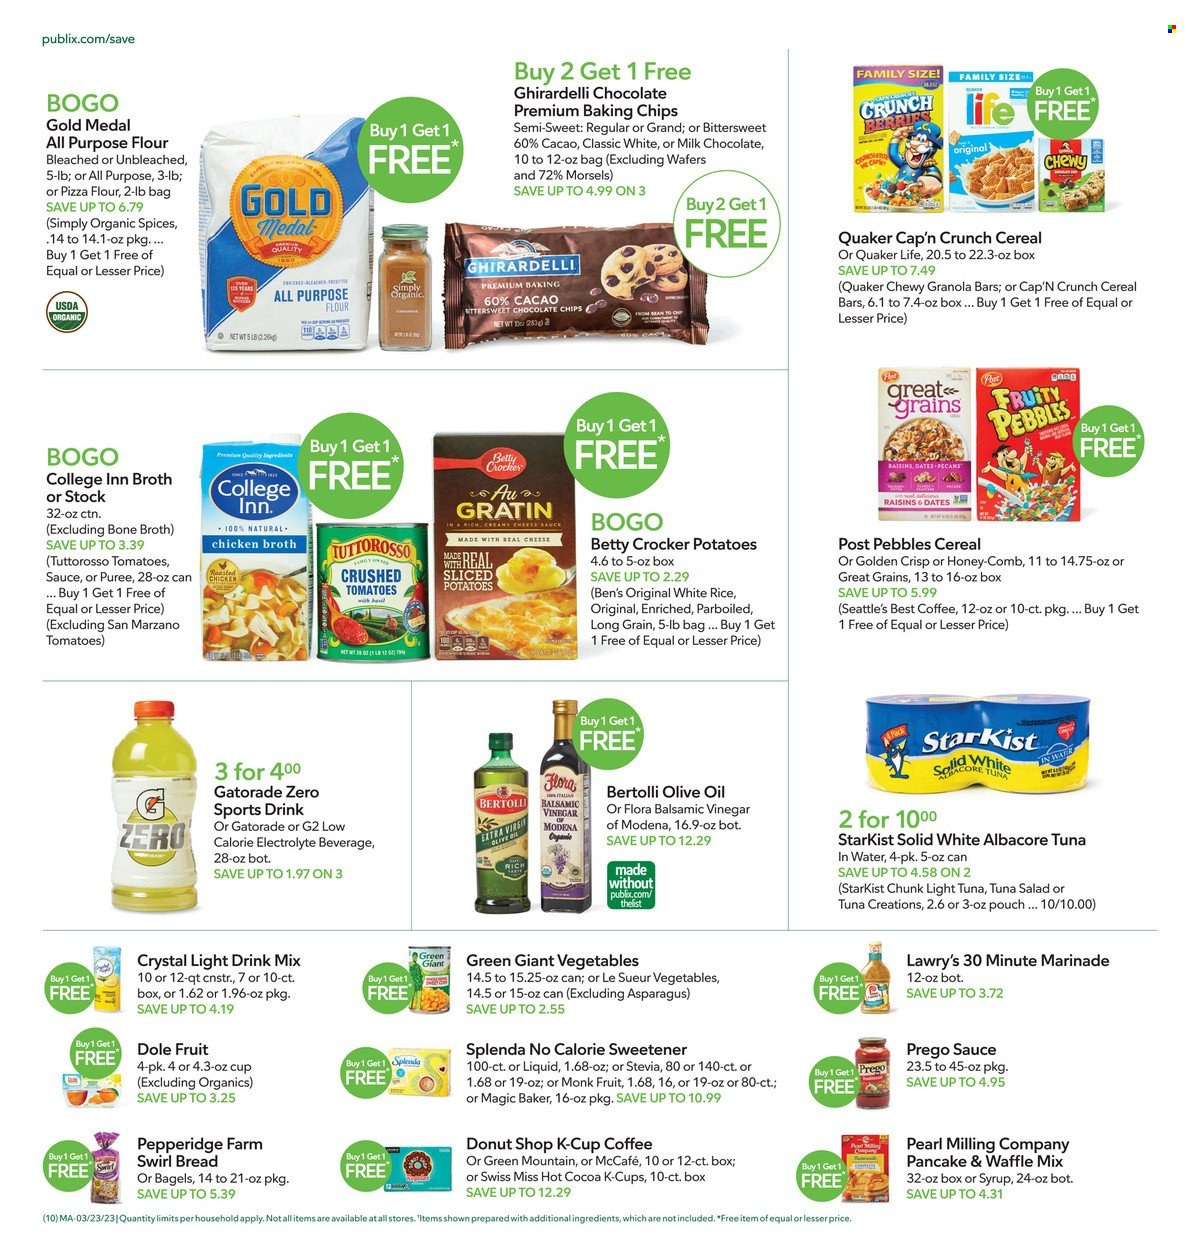 thumbnail - Publix Flyer - 03/23/2023 - 03/29/2023 - Sales products - bagels, Dole, StarKist, pizza, pancakes, Quaker, Bertolli, tuna salad, Swiss Miss, Flora, milk chocolate, wafers, cereal bar, Ghirardelli, all purpose flour, flour, chicken broth, broth, baking chips, stevia, sweetener, crushed tomatoes, tuna in water, light tuna, cereals, granola bar, Cap'n Crunch, Fruity Pebbles, rice, white rice, marinade, balsamic vinegar, olive oil, raisins, dried fruit, Gatorade, water, hot cocoa, coffee, coffee capsules, McCafe, K-Cups, Green Mountain, comb. Page 19.